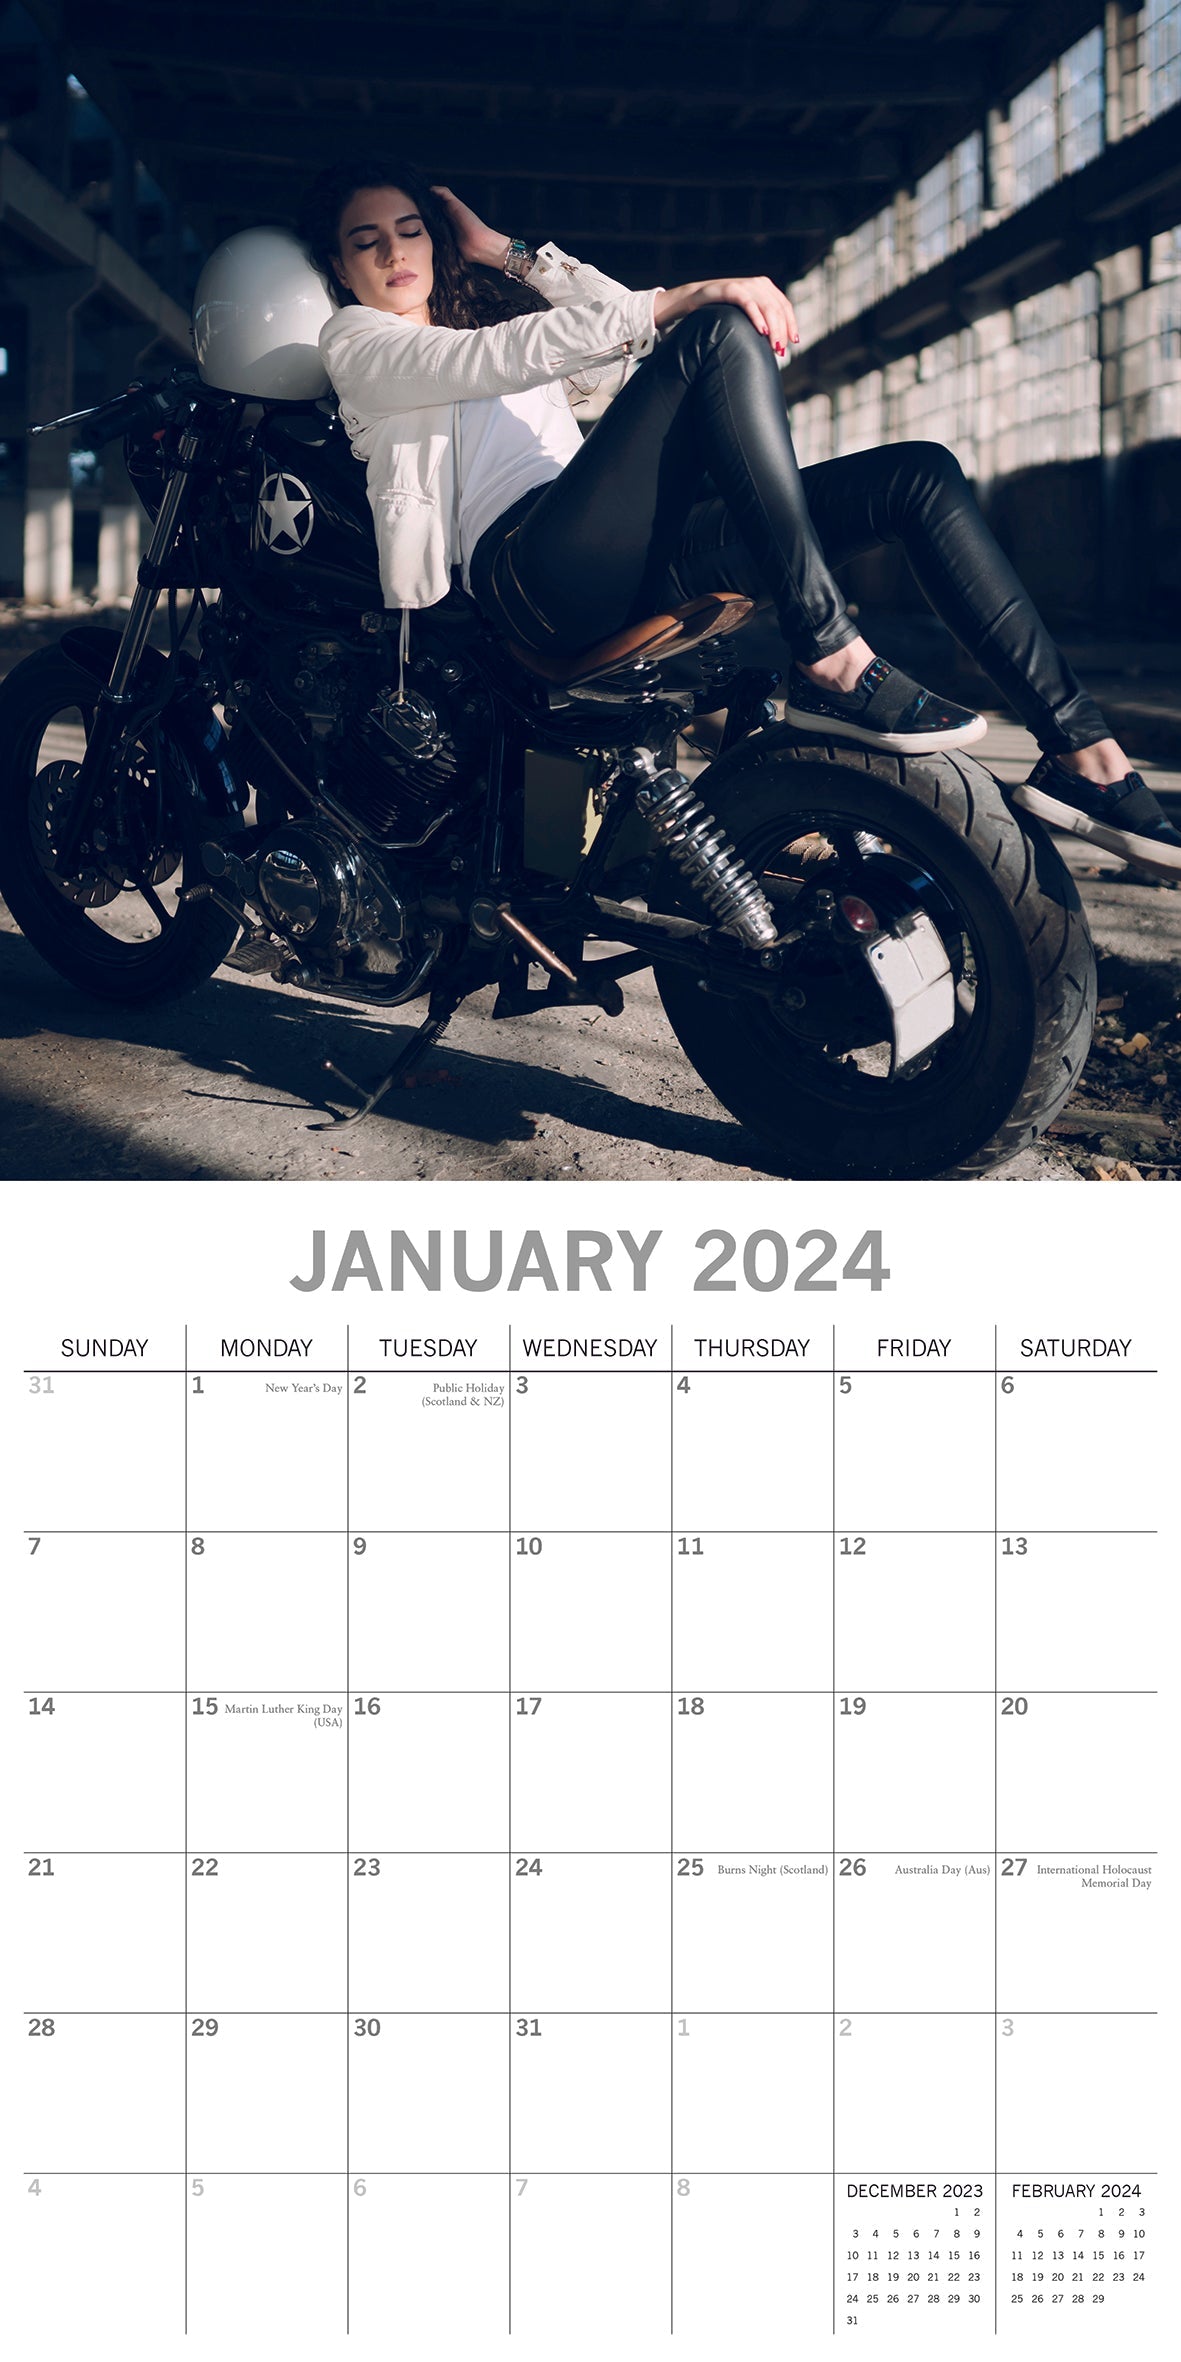 Sexy Girl Motorcycle Calendar 2024: Jan 2024 to Dec 2024, Bonus 3 Months  Last 2023, 15 Months, Thick & Sturdy Paper, Great Gift For Organizing 